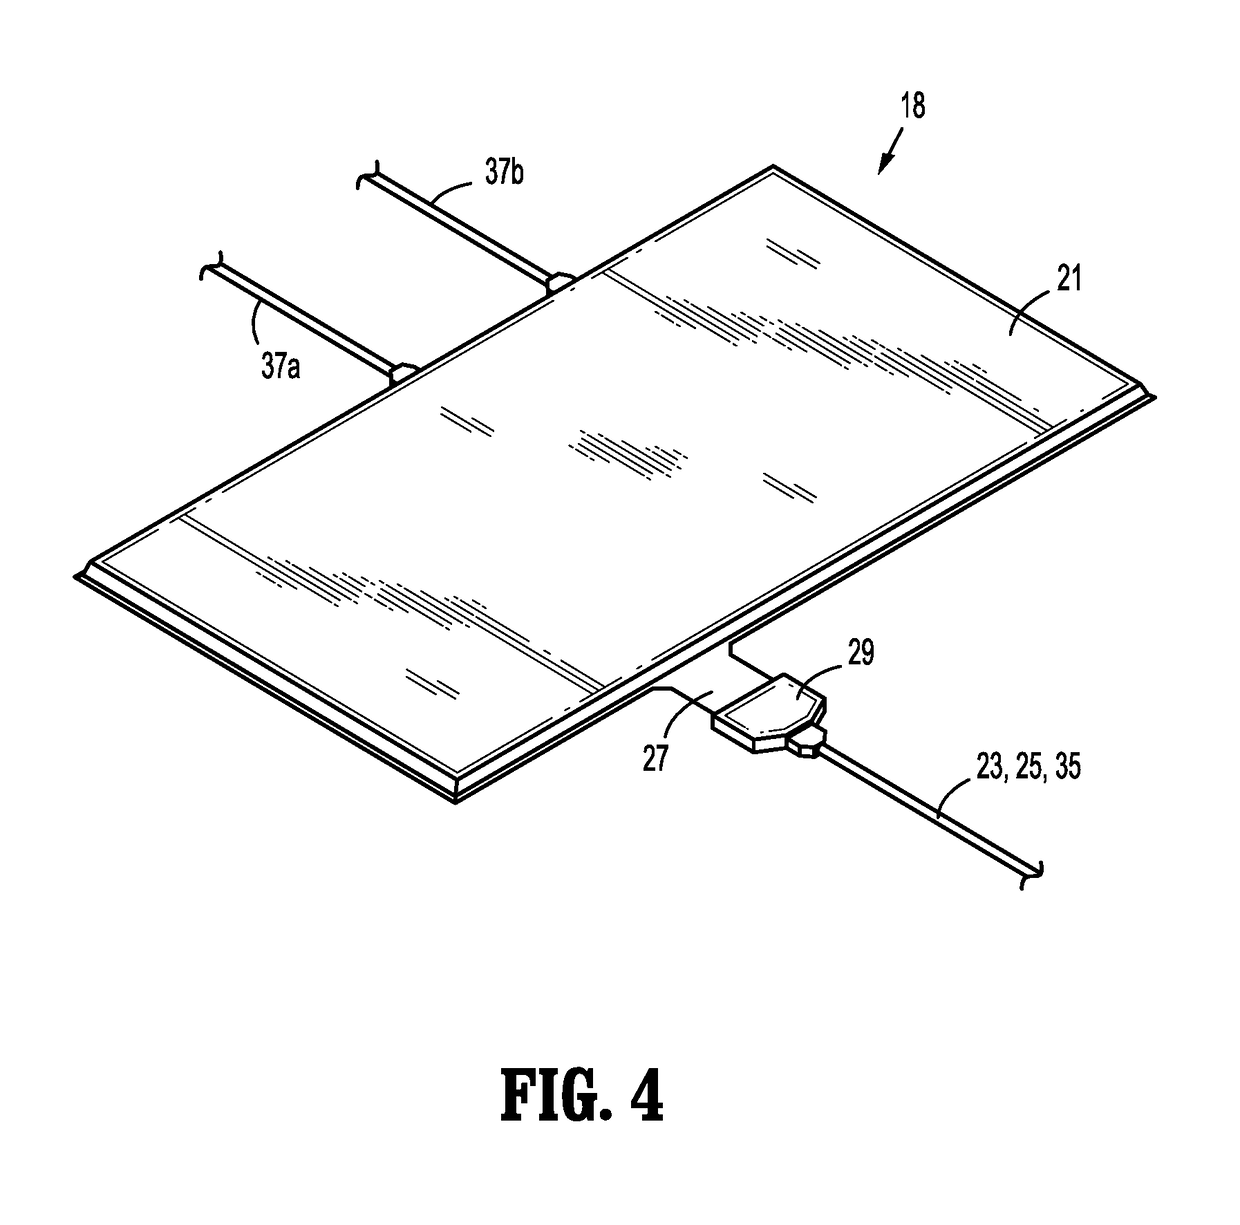 Mat based antenna and heater system, for use during medical procedures